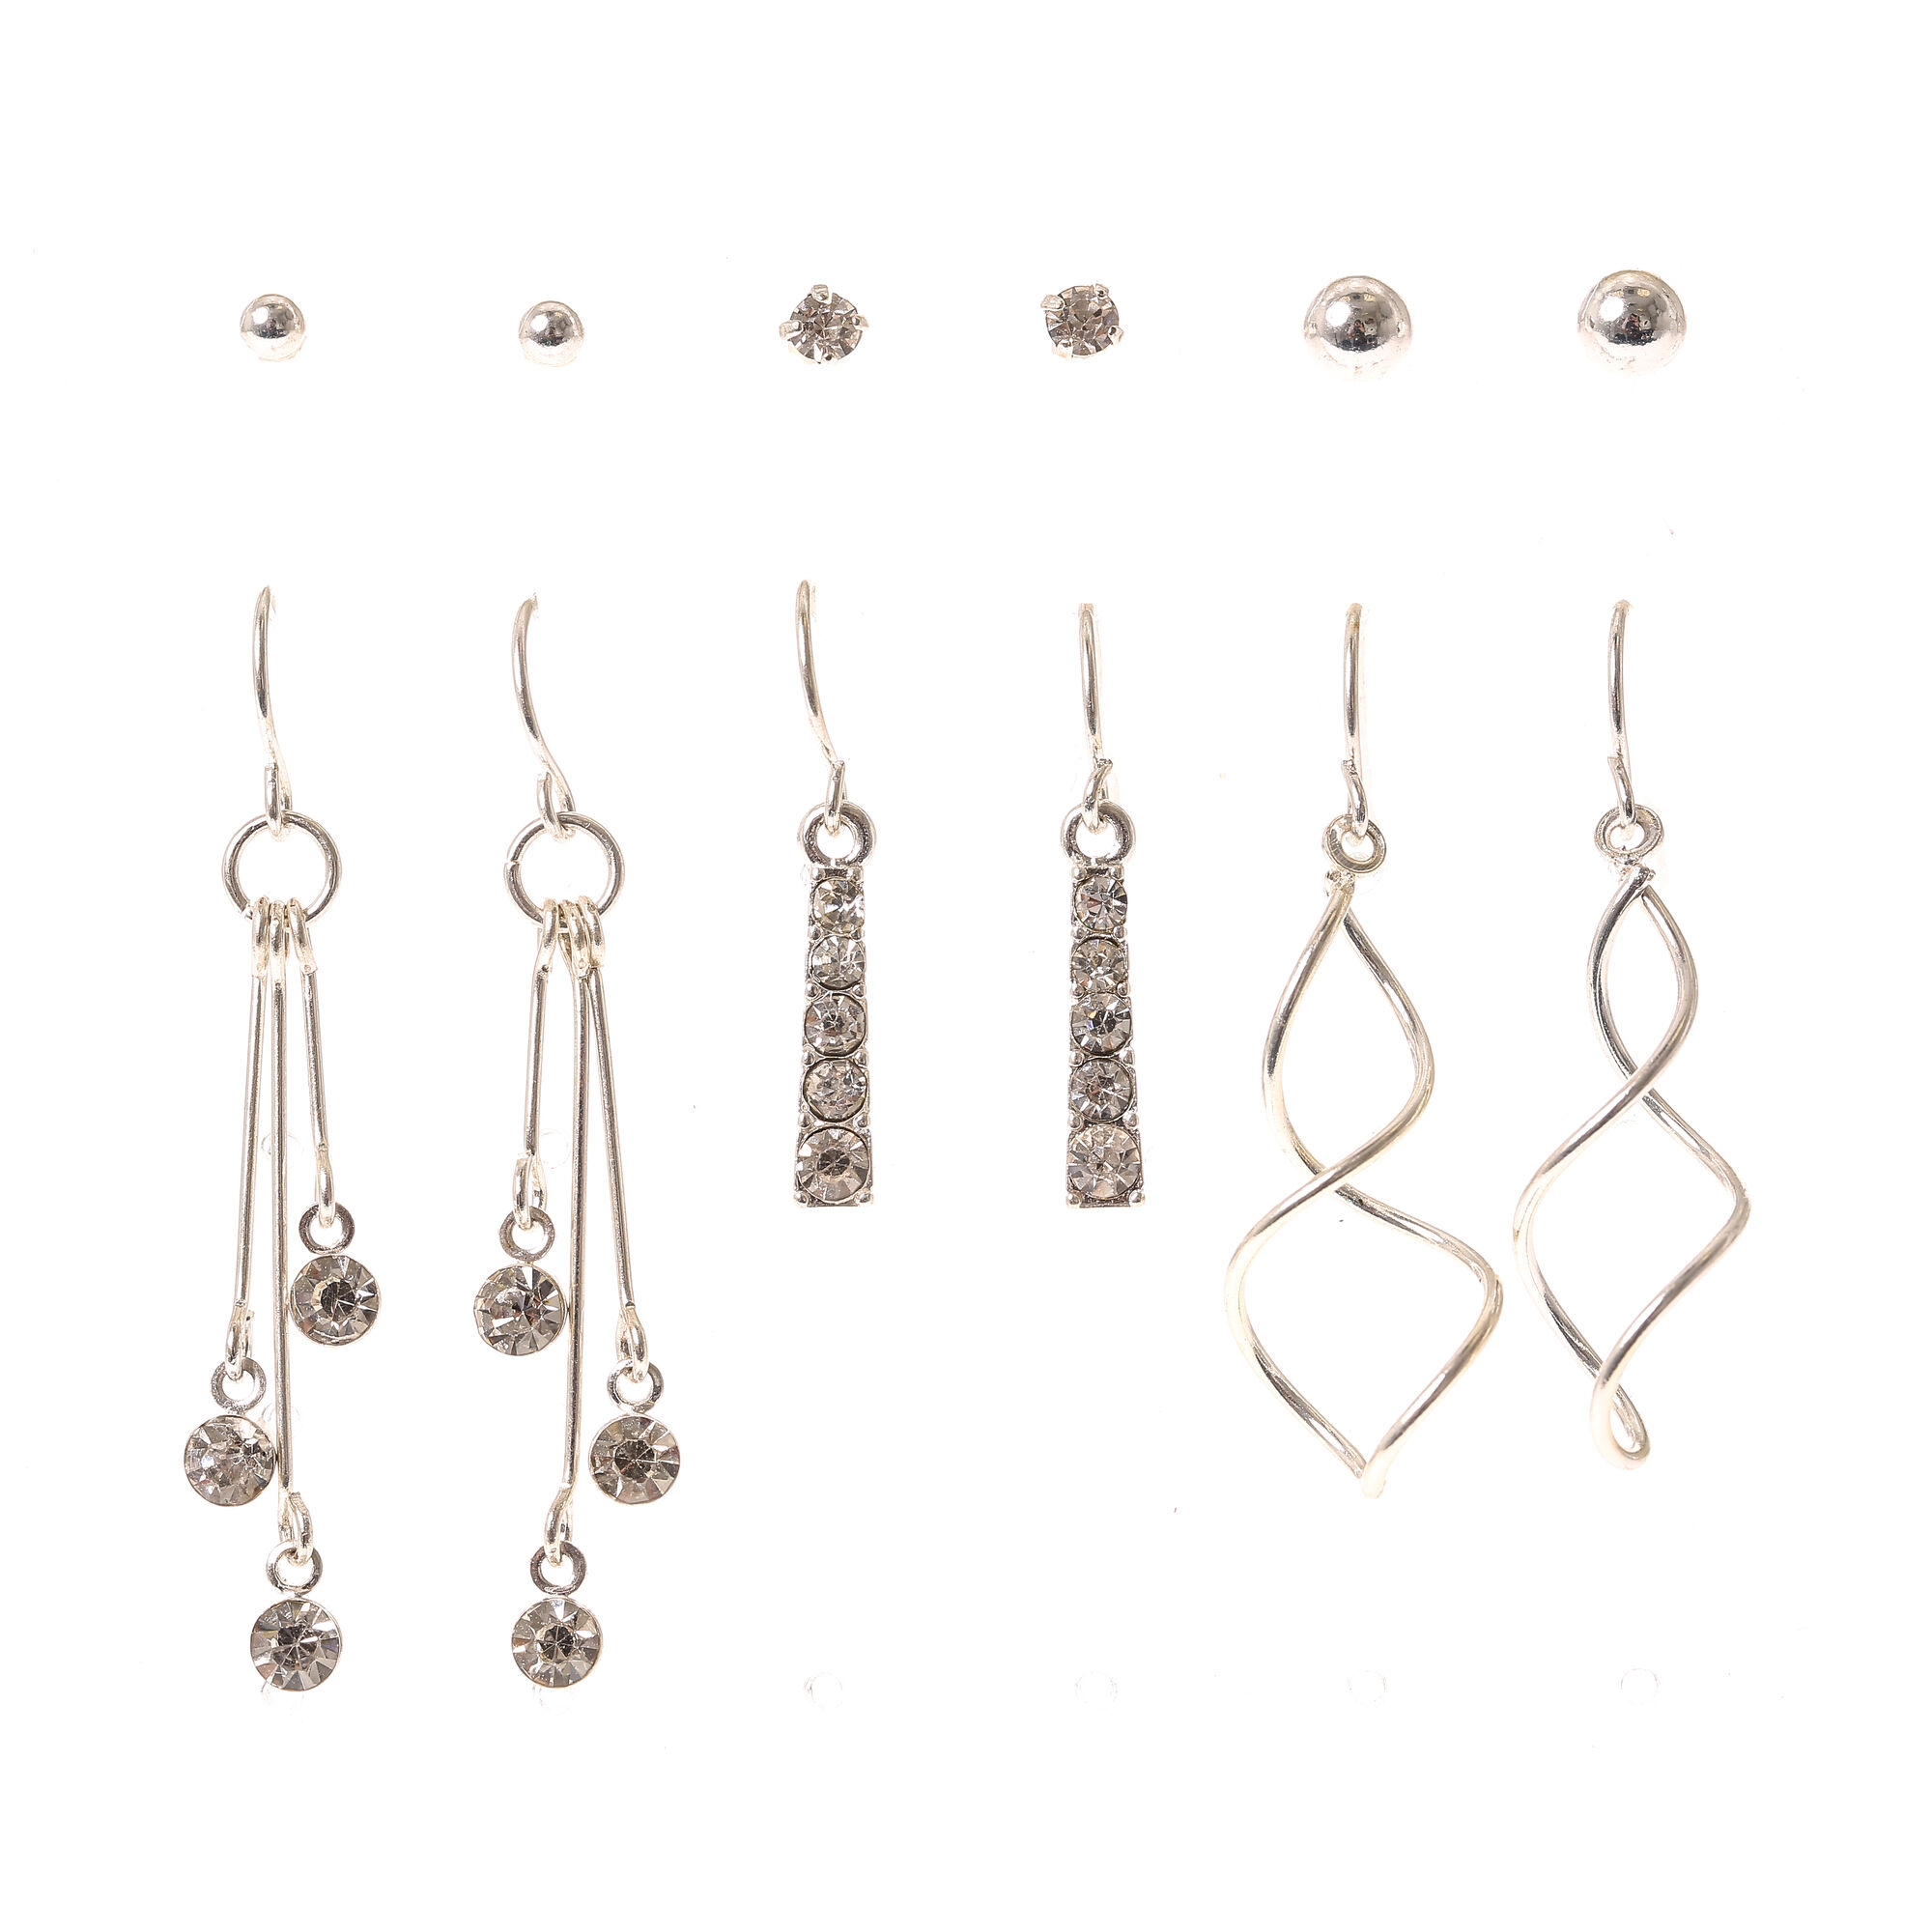 View Claires Stud Linear Drop Earrings 6 Pack Silver information